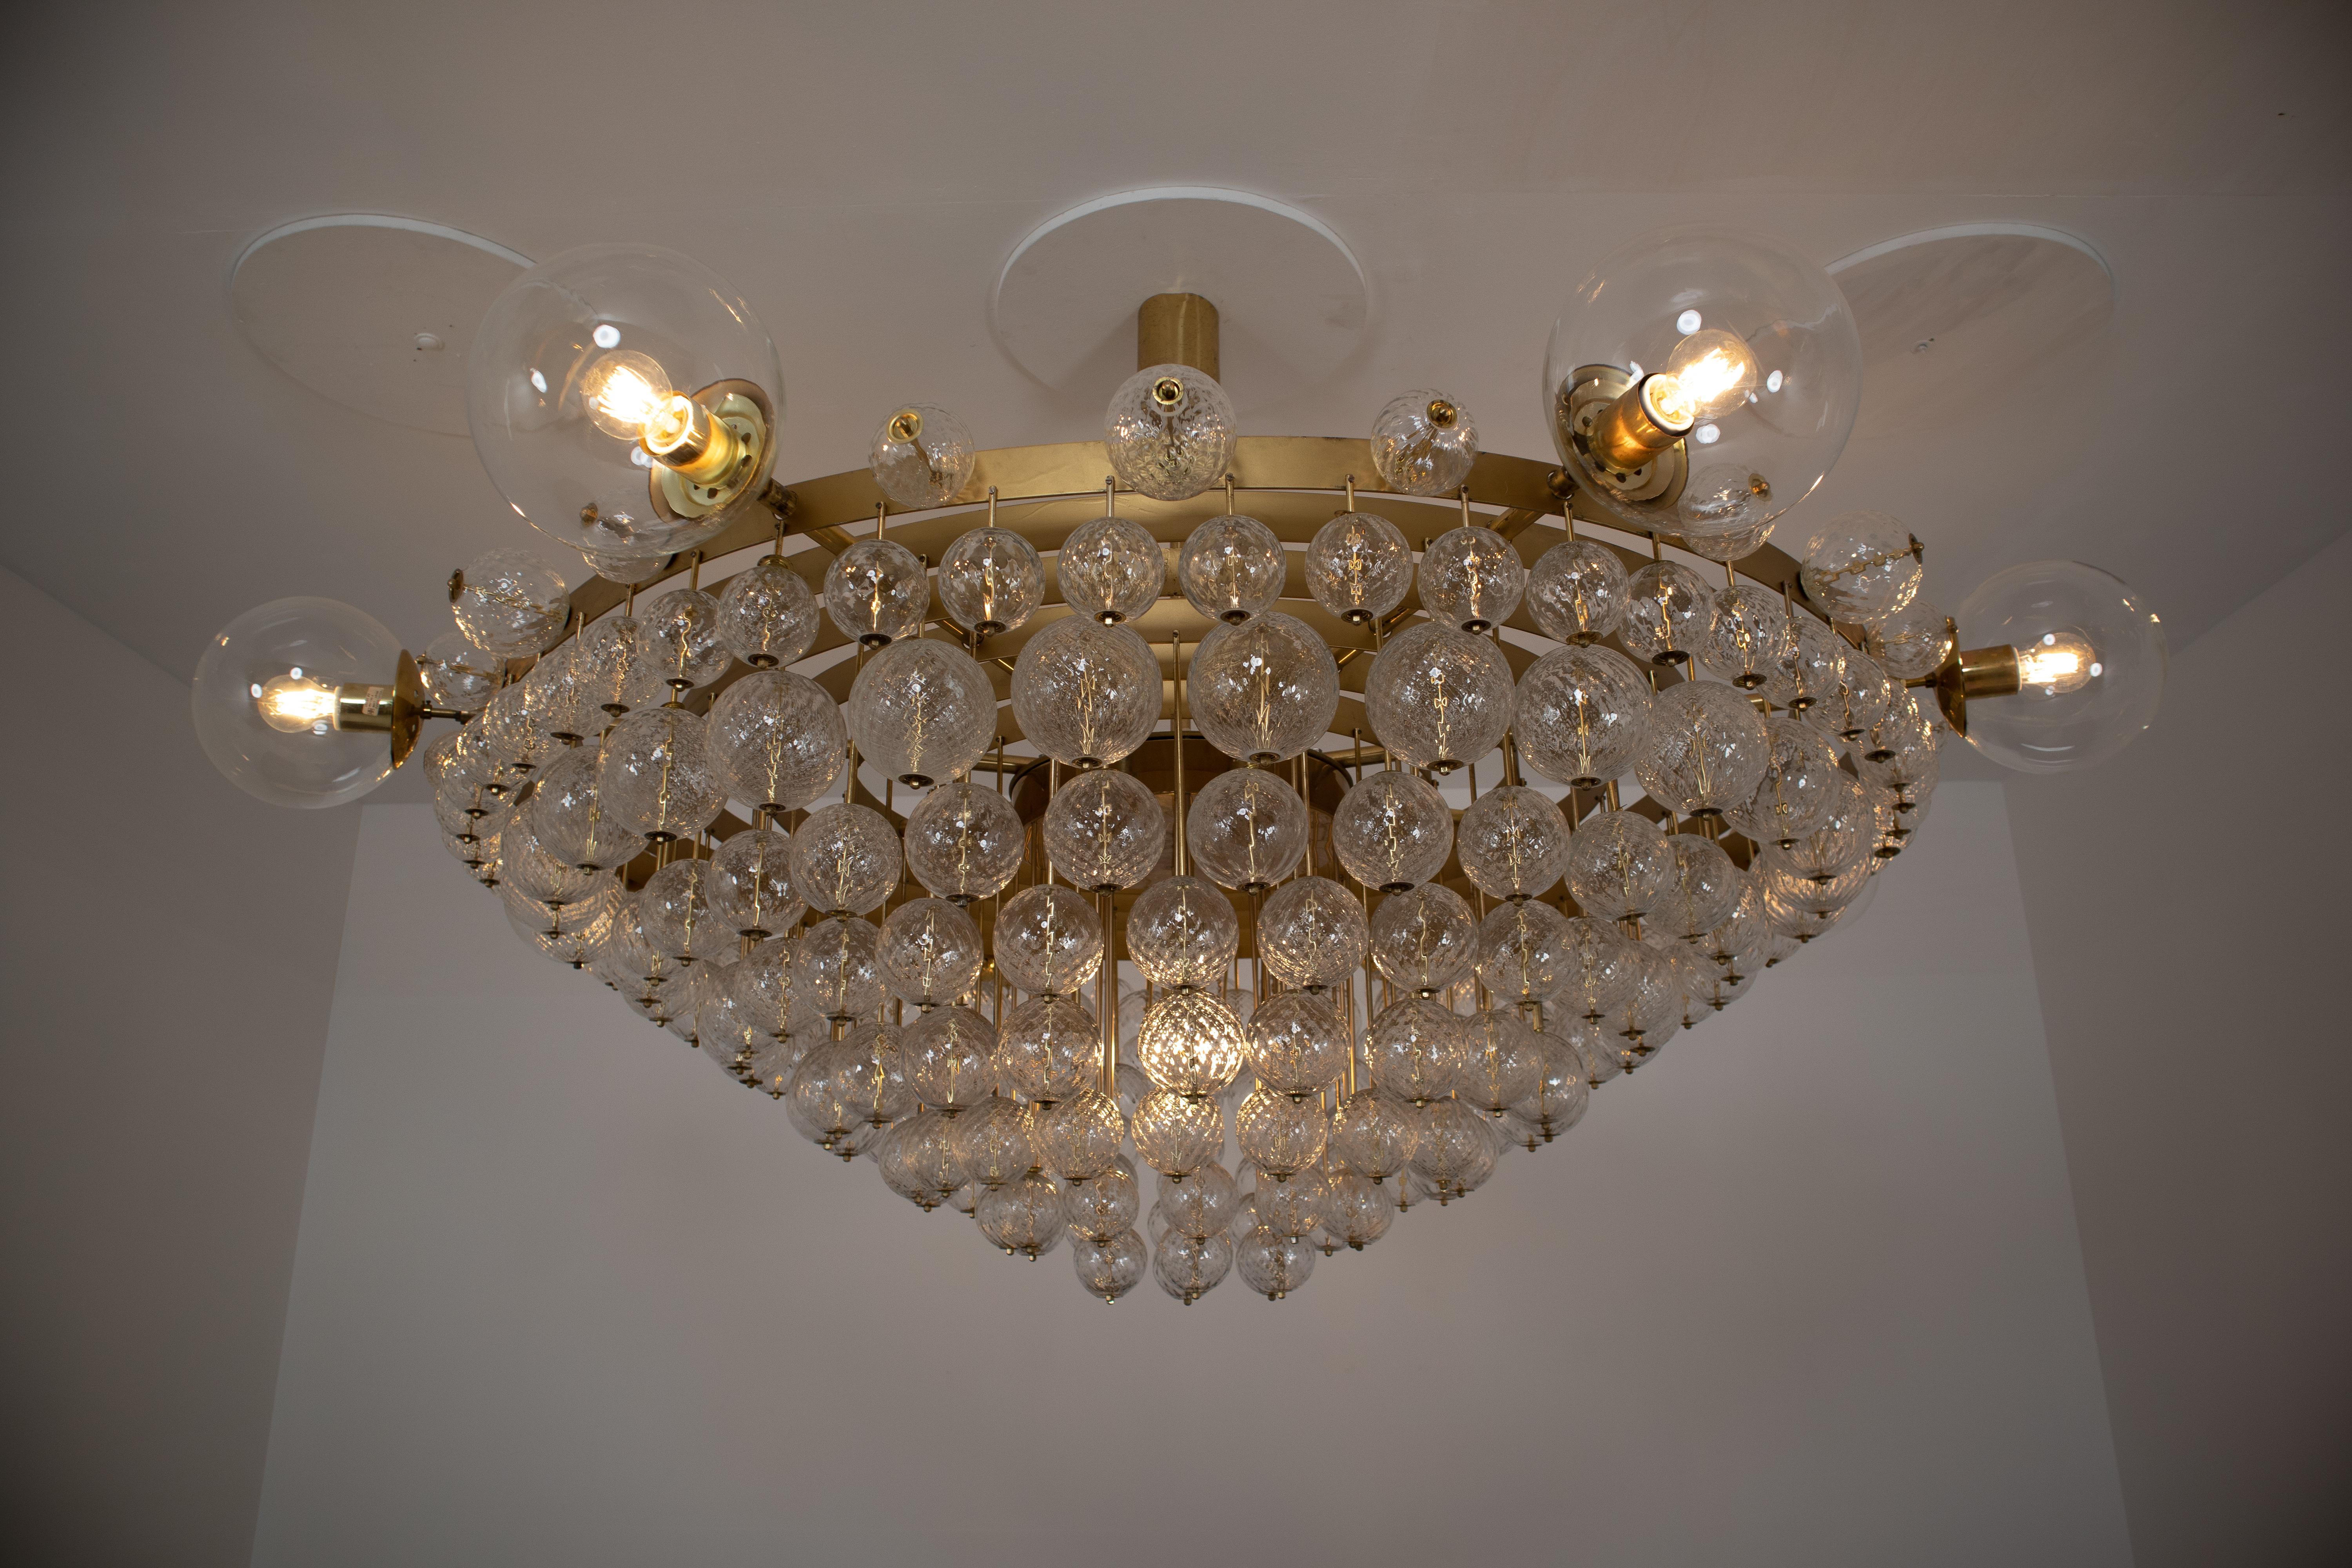 Extremely Large Hotel Chandelier with Brass Fixture and Structured Glass Globes 7